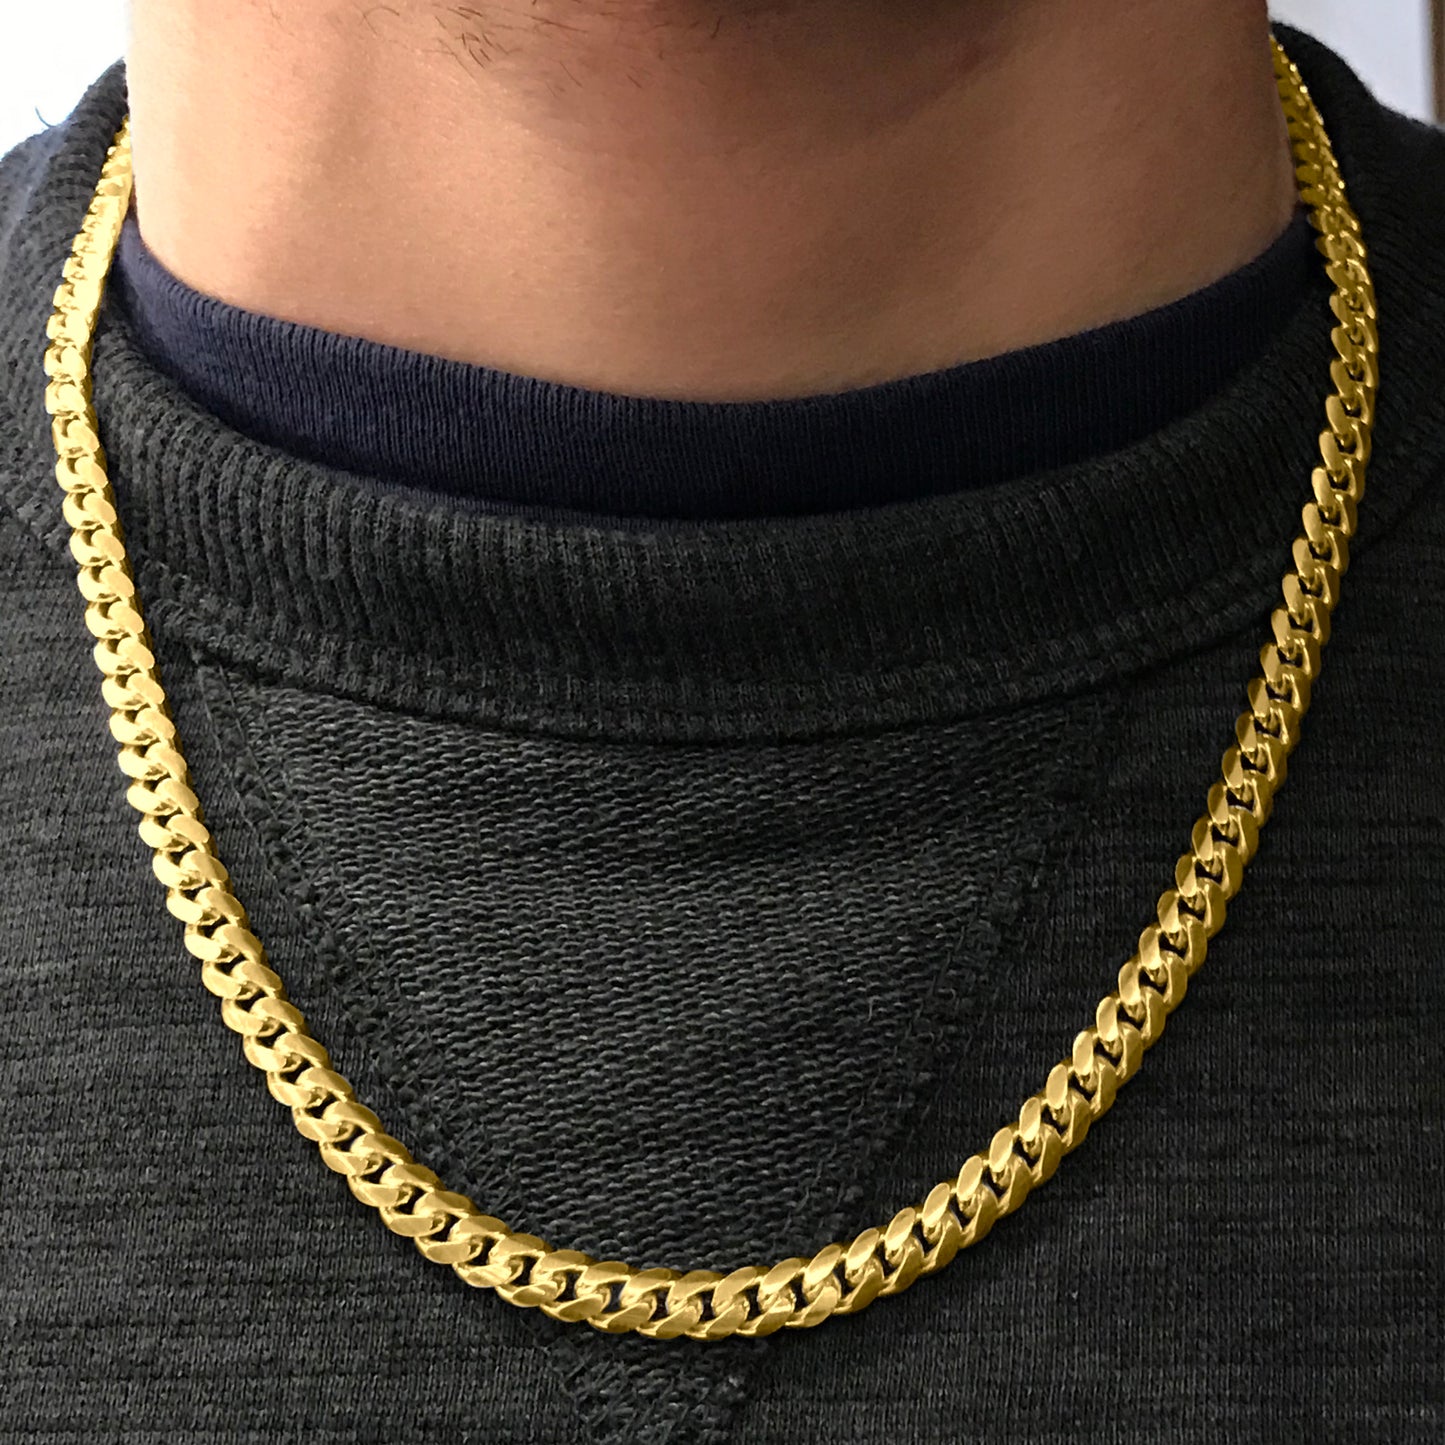 Men’s 6.5mm Miami Cuban Link Chain Necklace 20” in 14k Gold